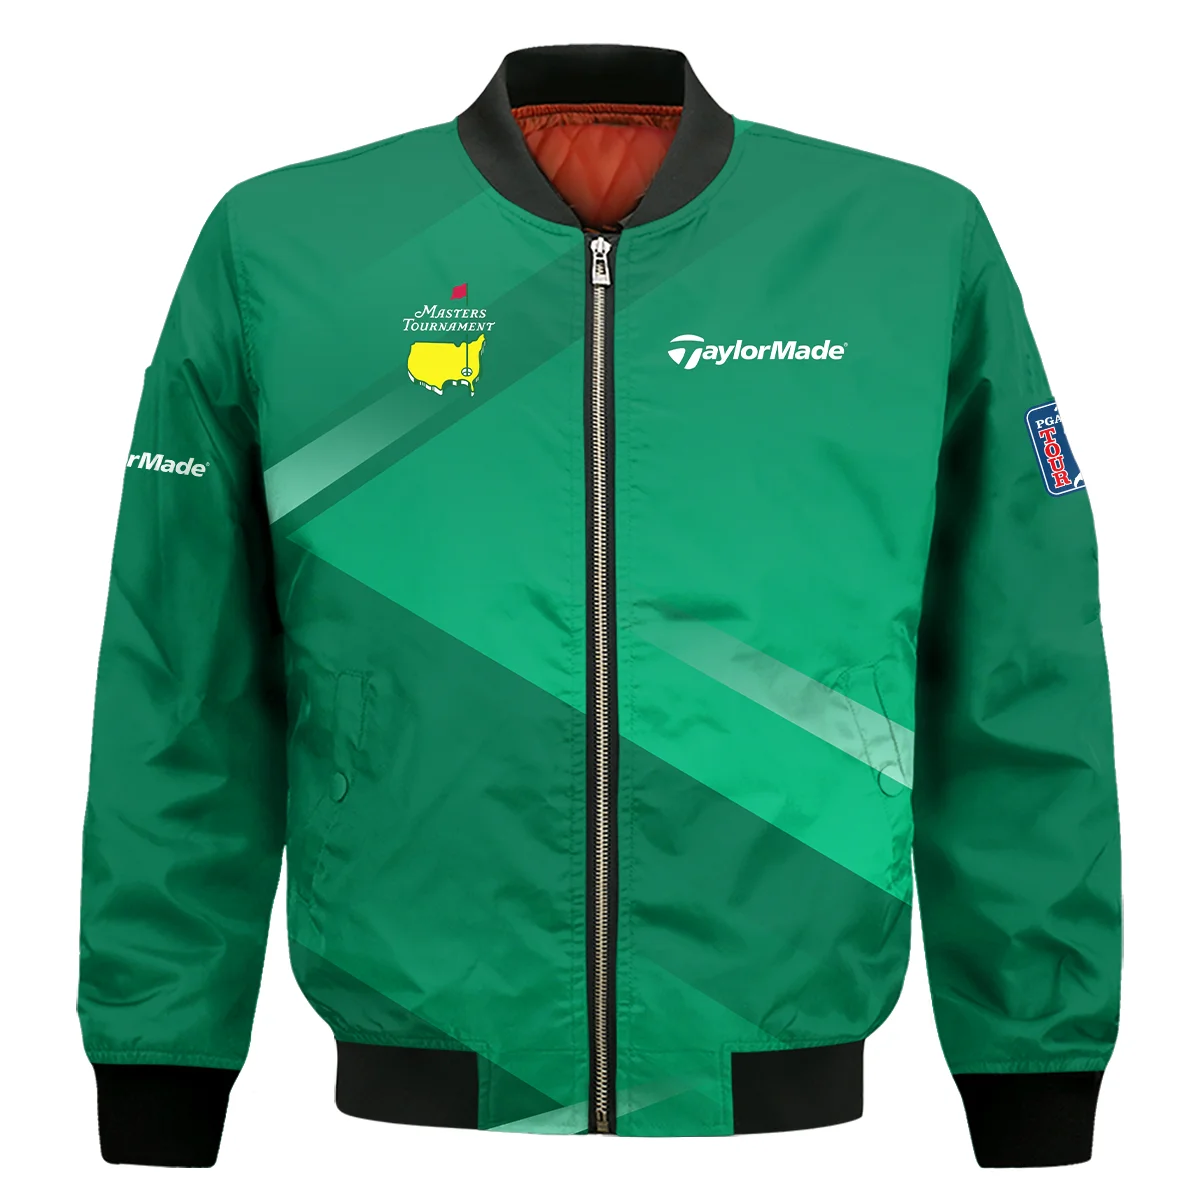 Taylor Made Masters Tournament Golf Bomber Jacket Green Gradient Pattern Sports Bomber Jacket GBJ1374